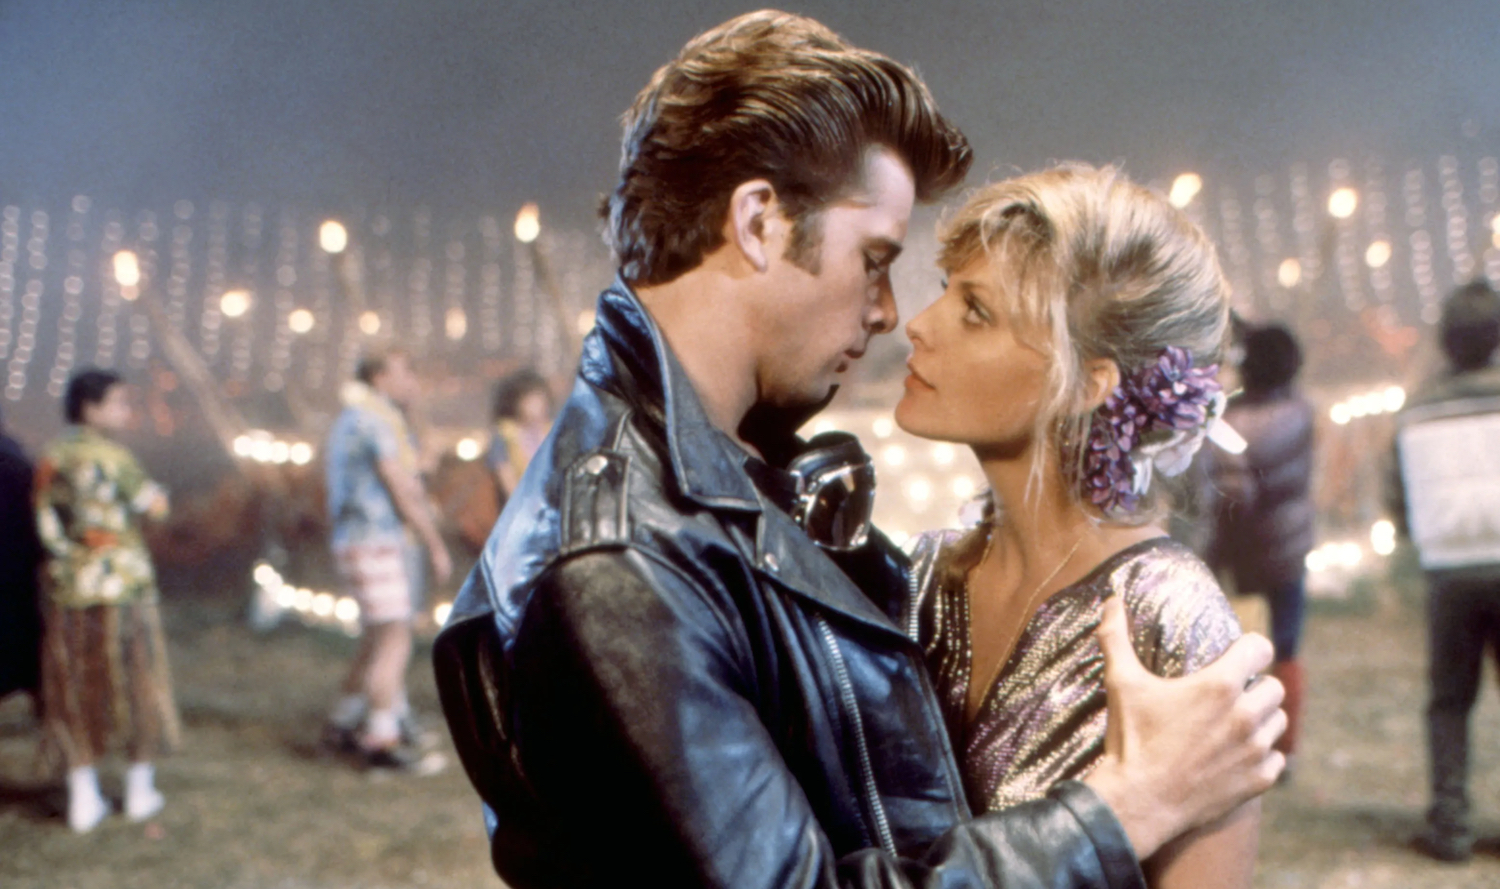 Grease 2 A Cult Classic Thats Way Cooler Than The Original Den of Geek